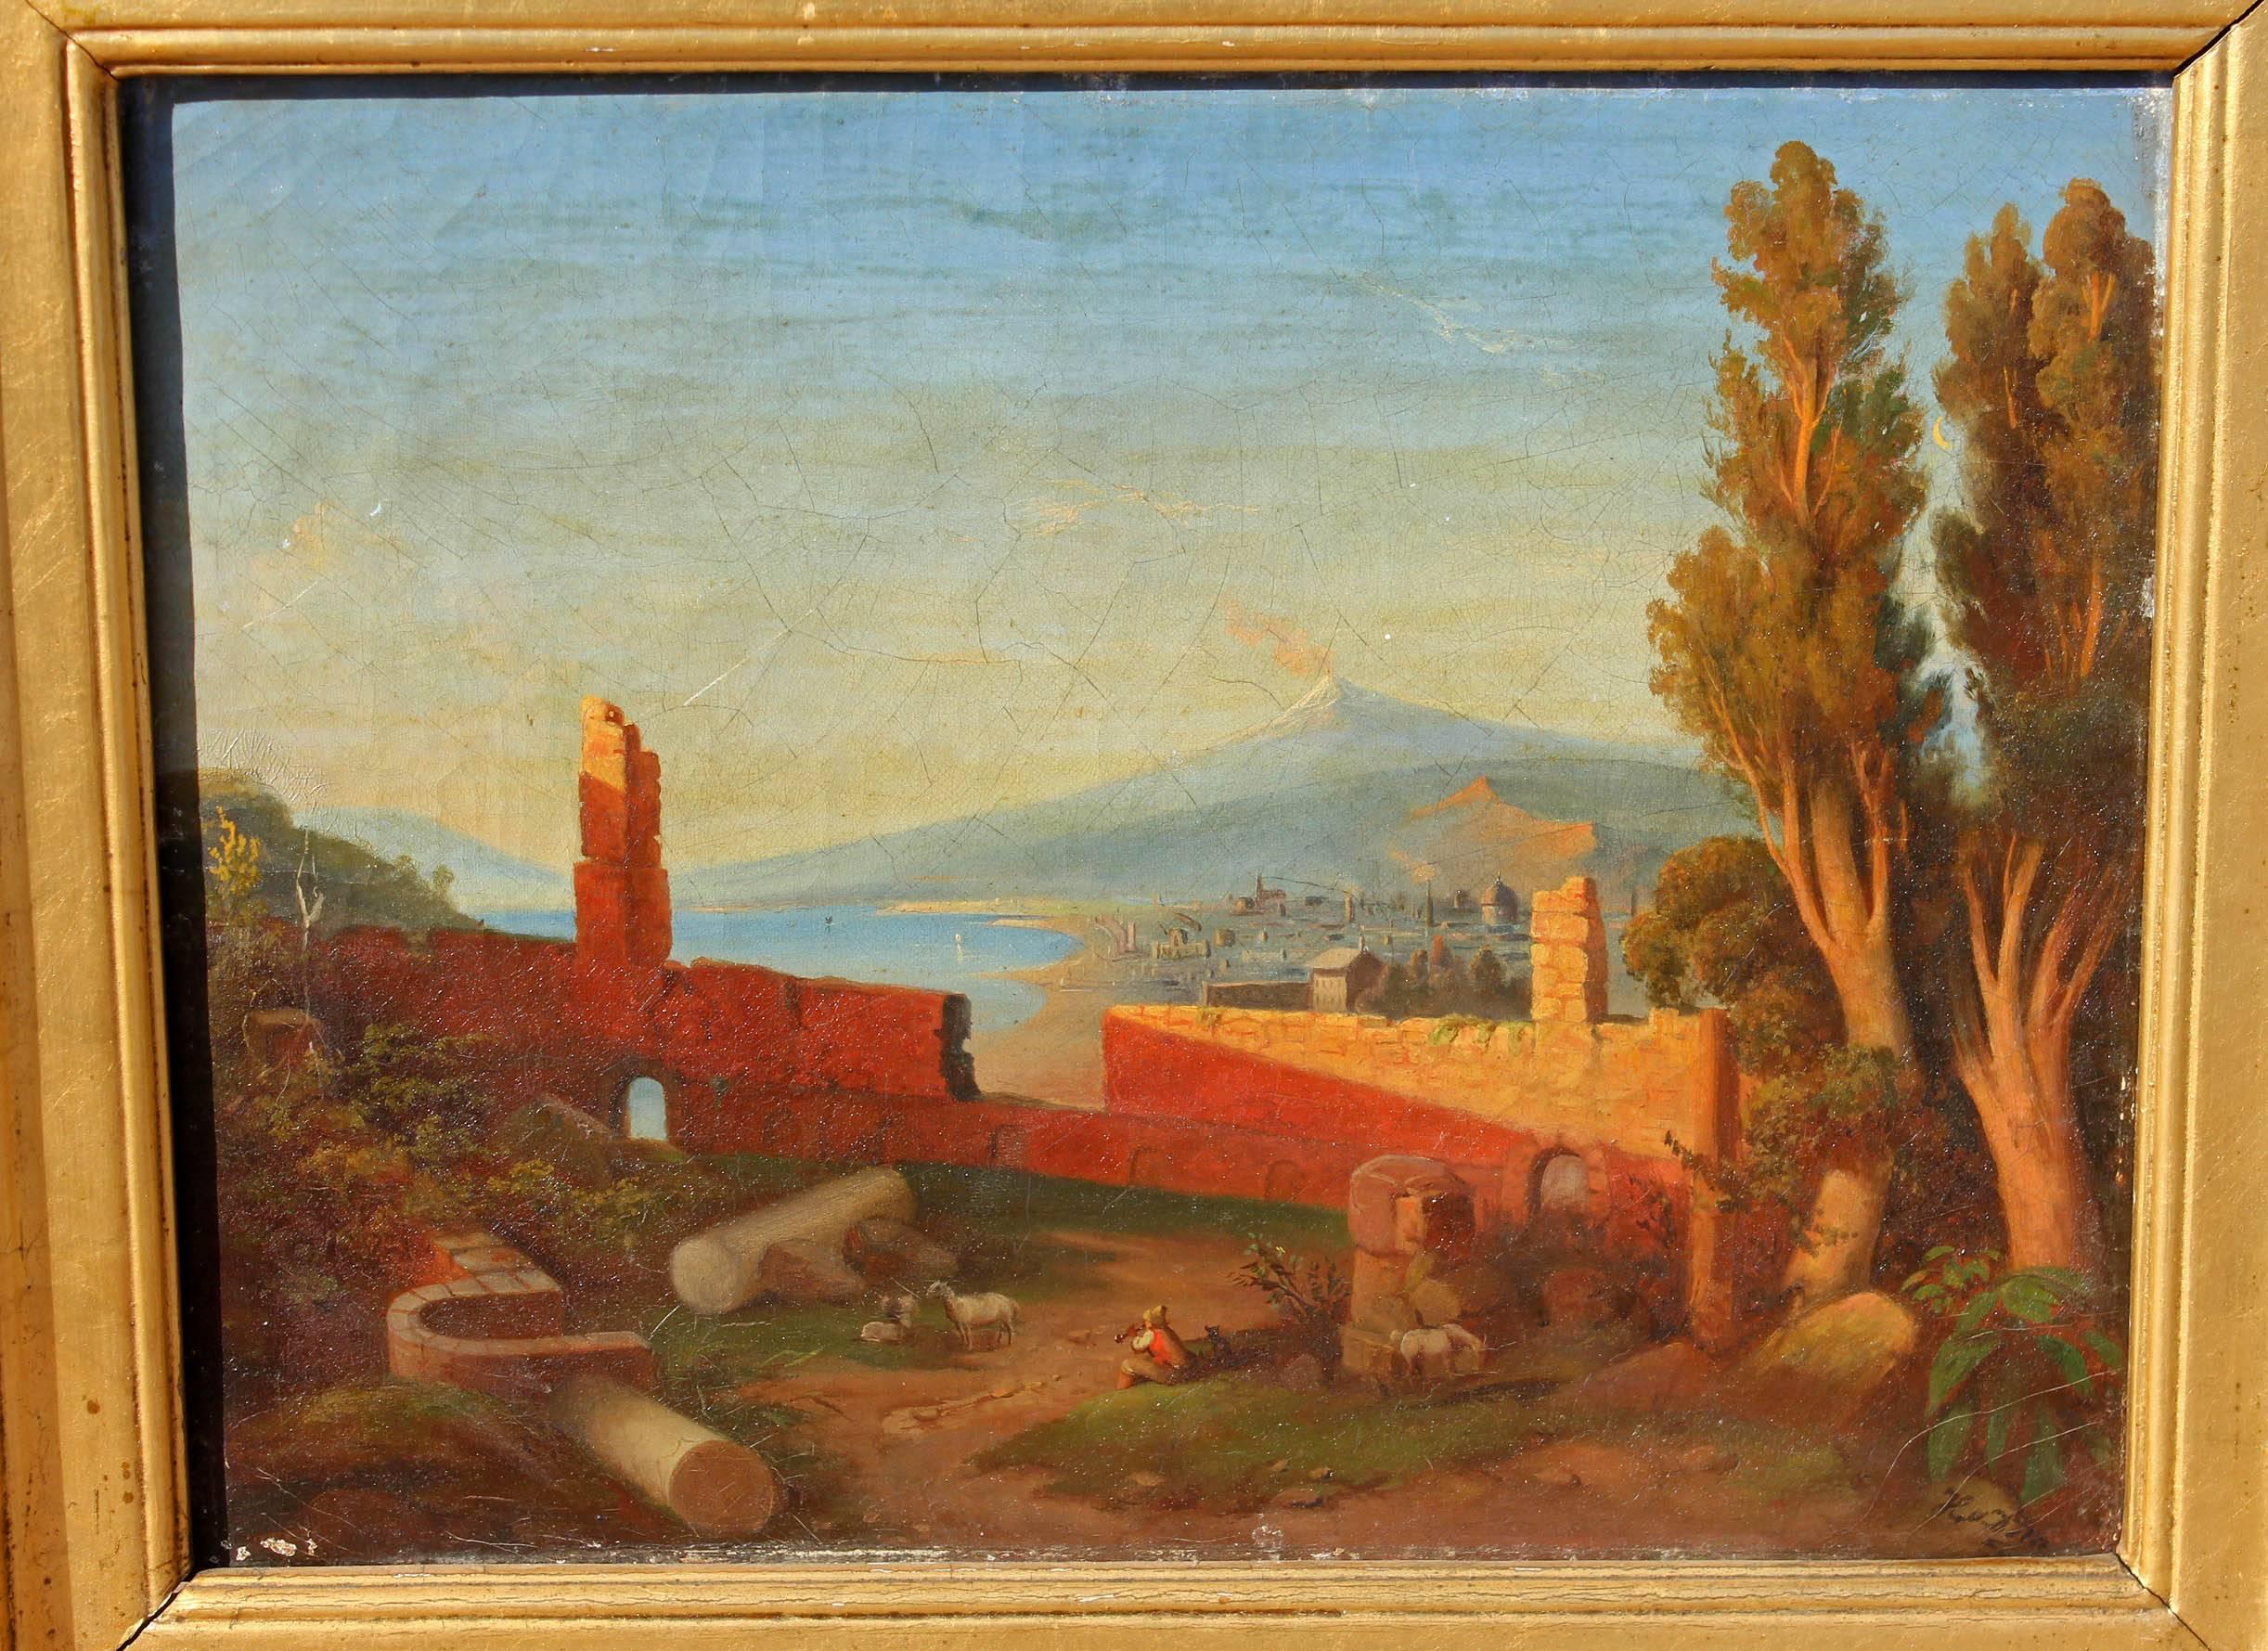 Sicilian landscape oil painting. Mount Etna in the background. Oil on canvas. Illegibly signed, circa 1860s. Painting measures 17.75